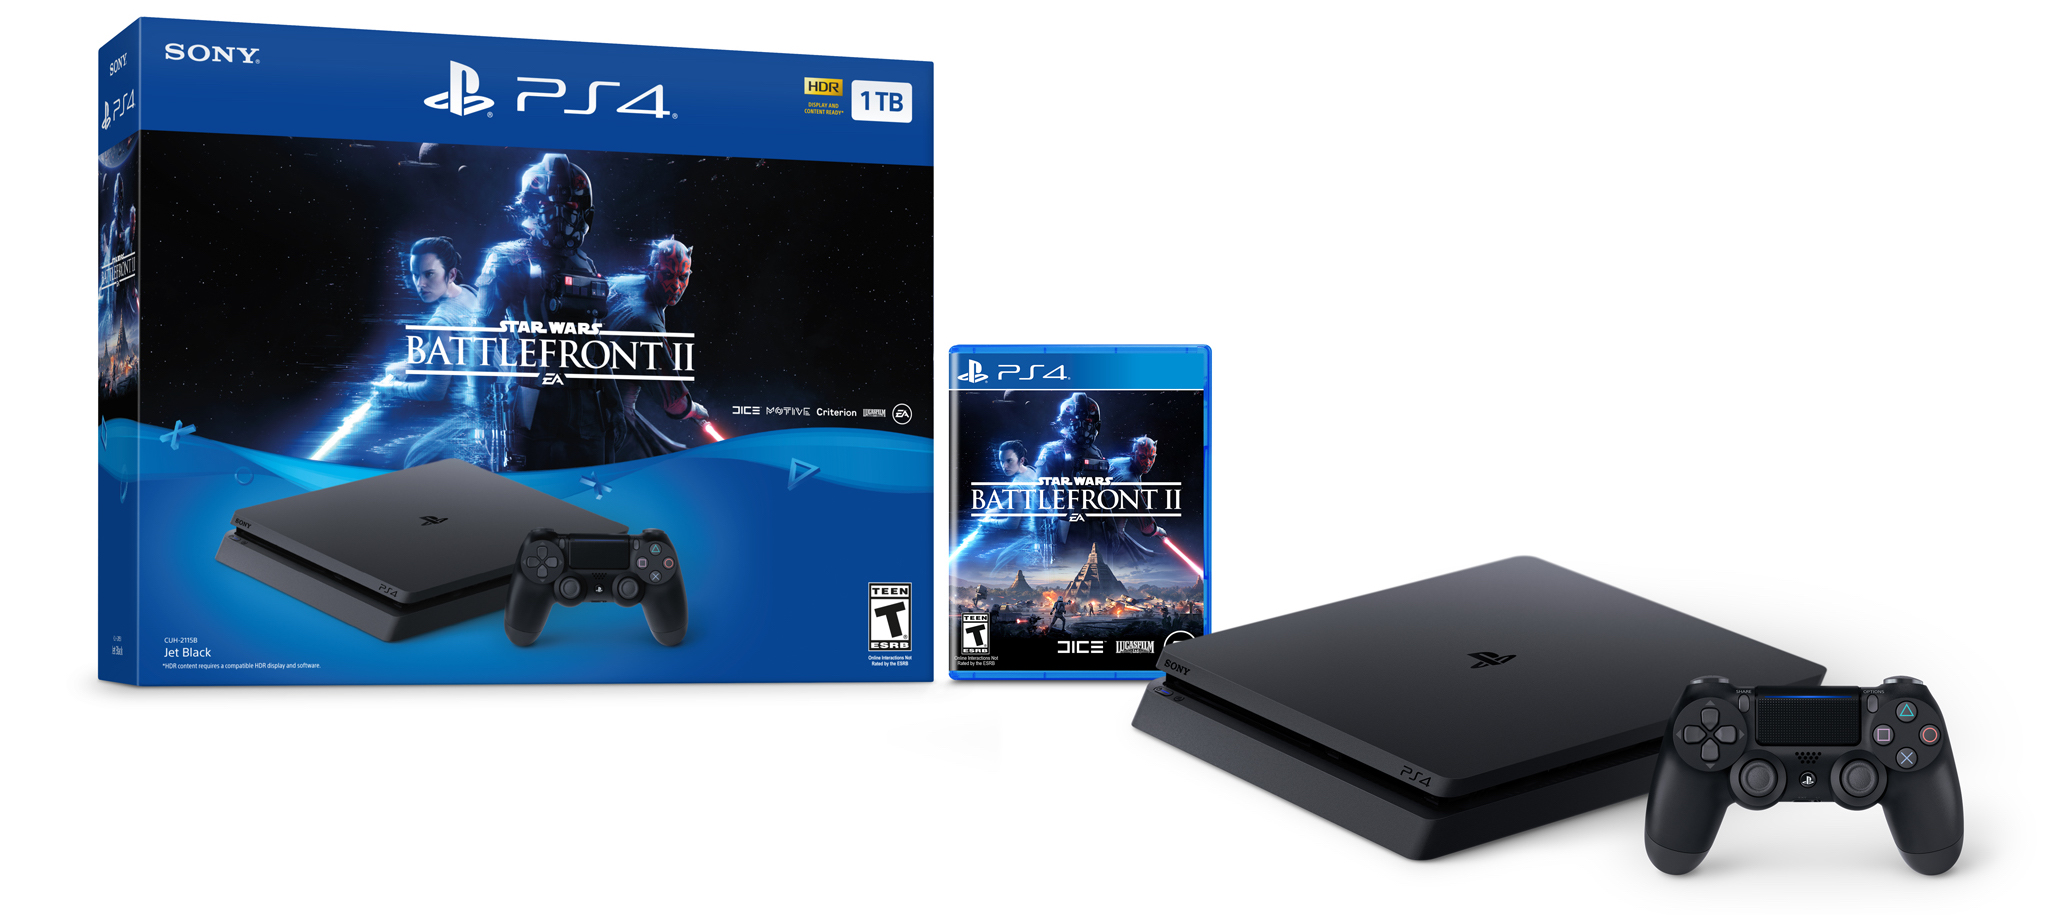 Console Sony Playstation 4 Pro Star Wars BattleFront 2 Special Edition -  Passaros Games